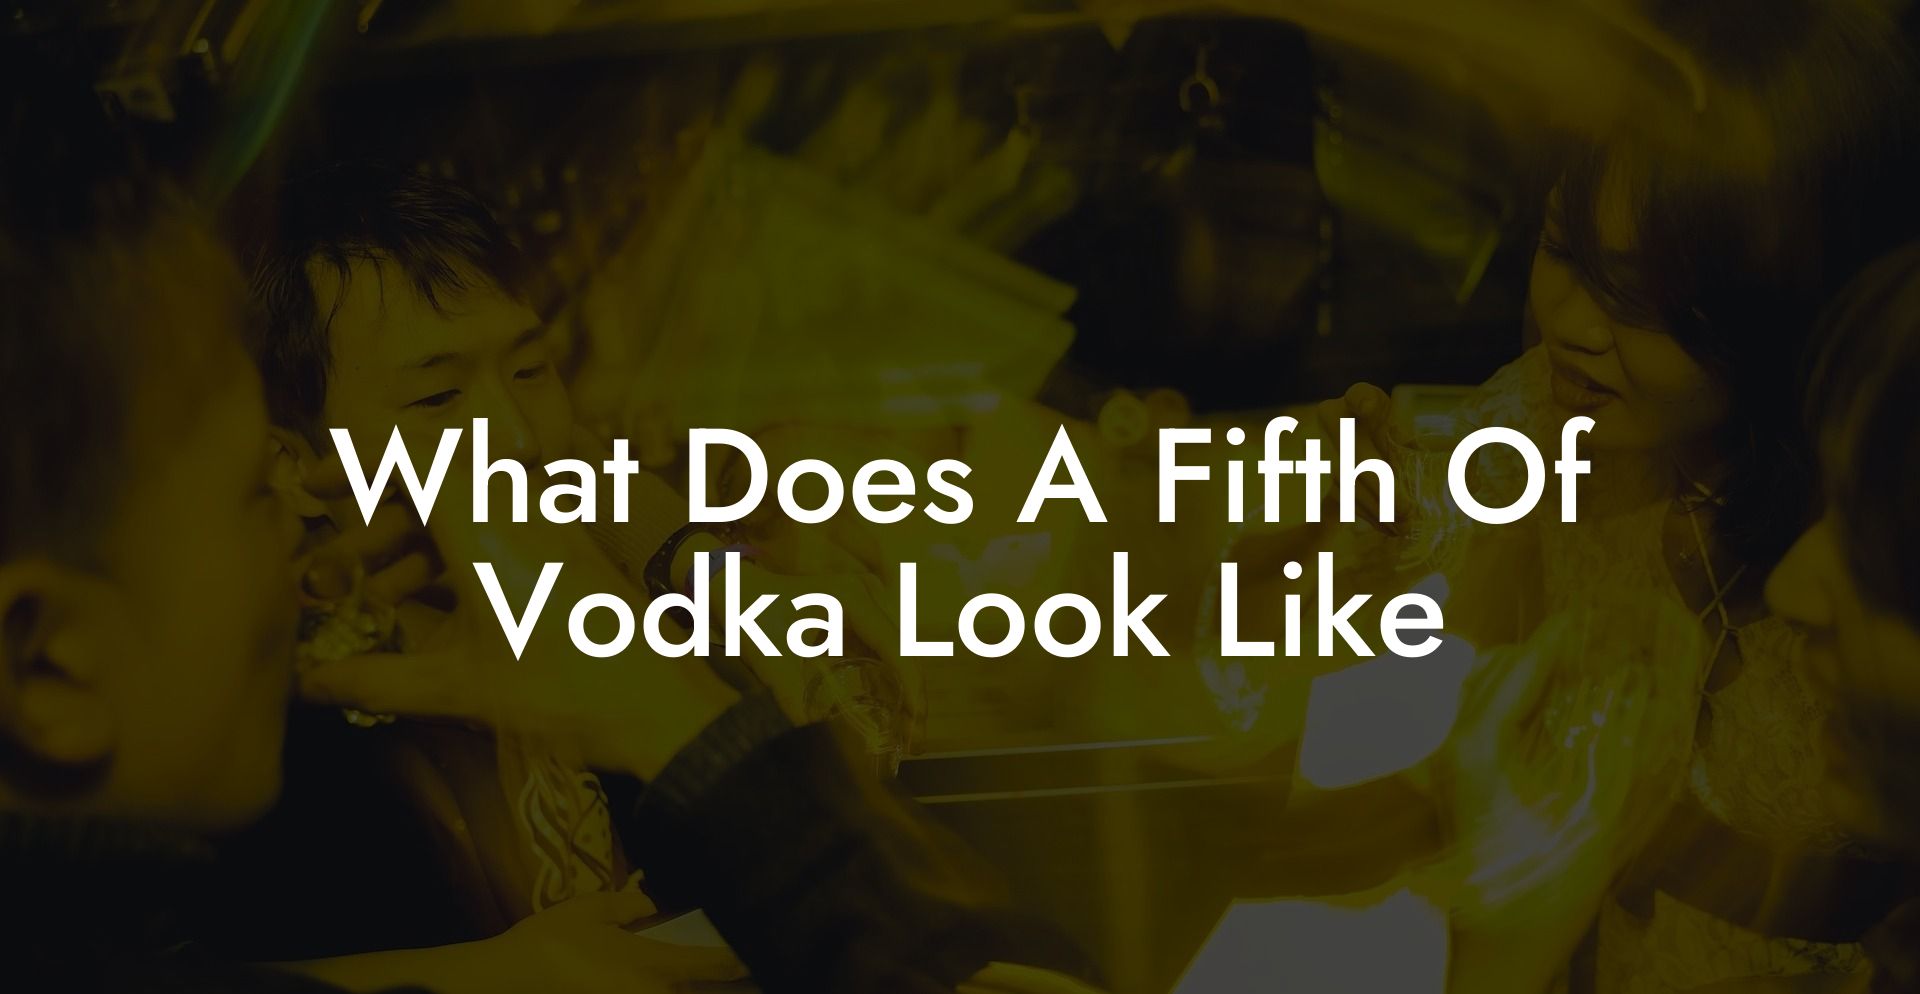 What Does A Fifth Of Vodka Look Like